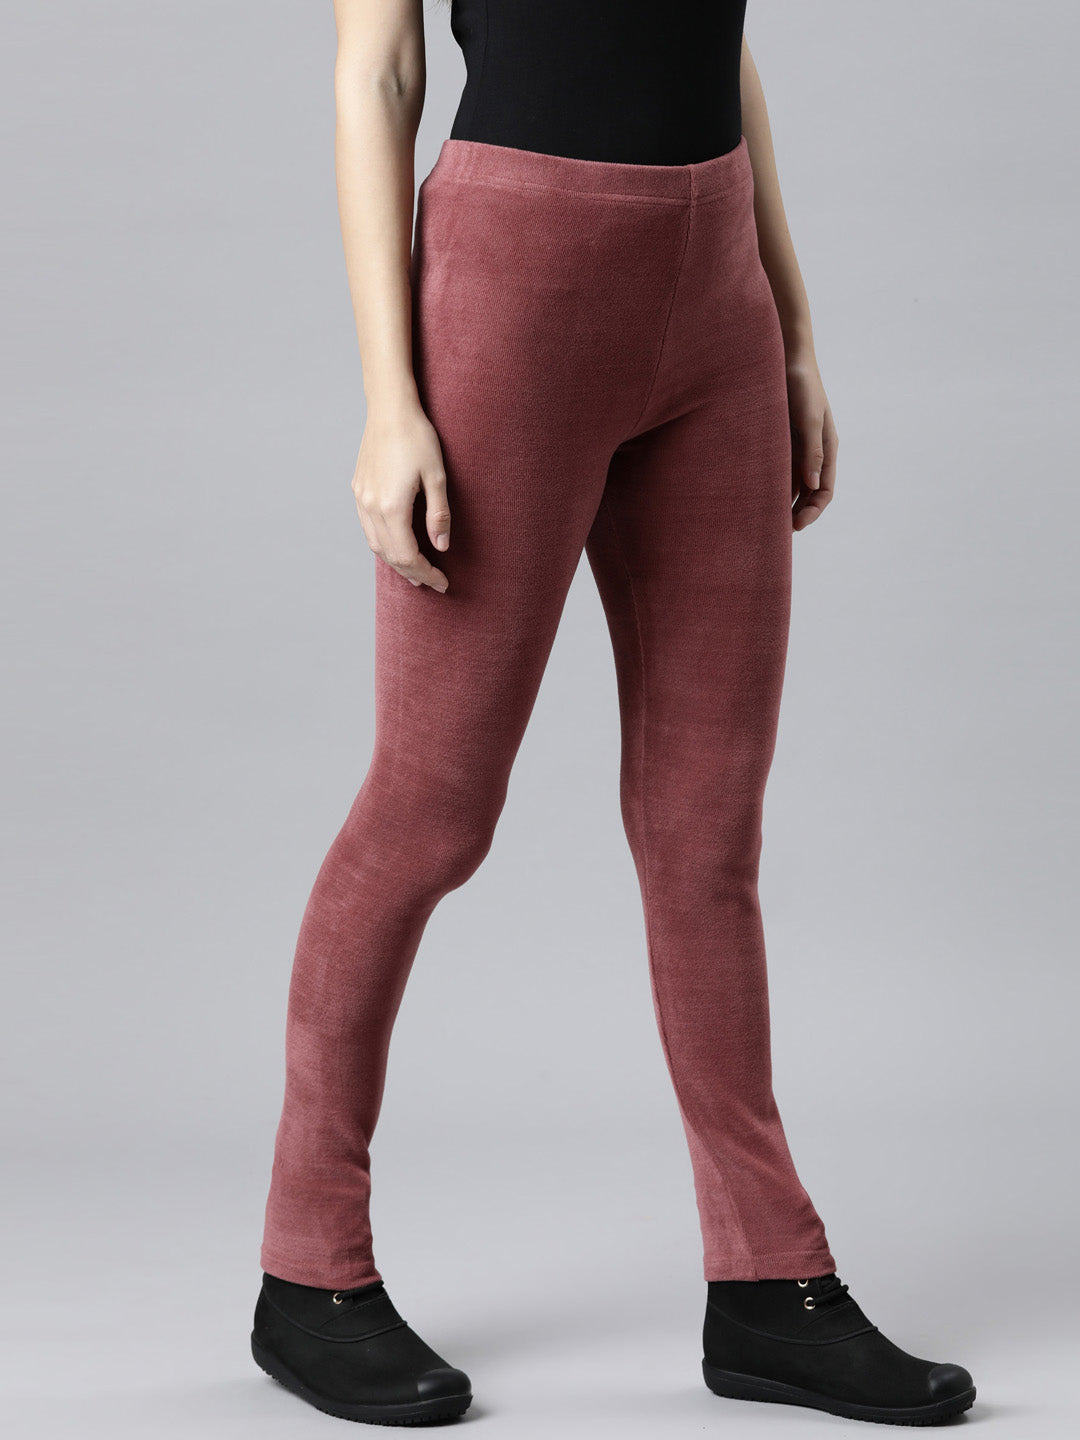 Buy GlobyCraft Winter Wear Woolen Legging for Girls Women Online In India  At Discounted Prices